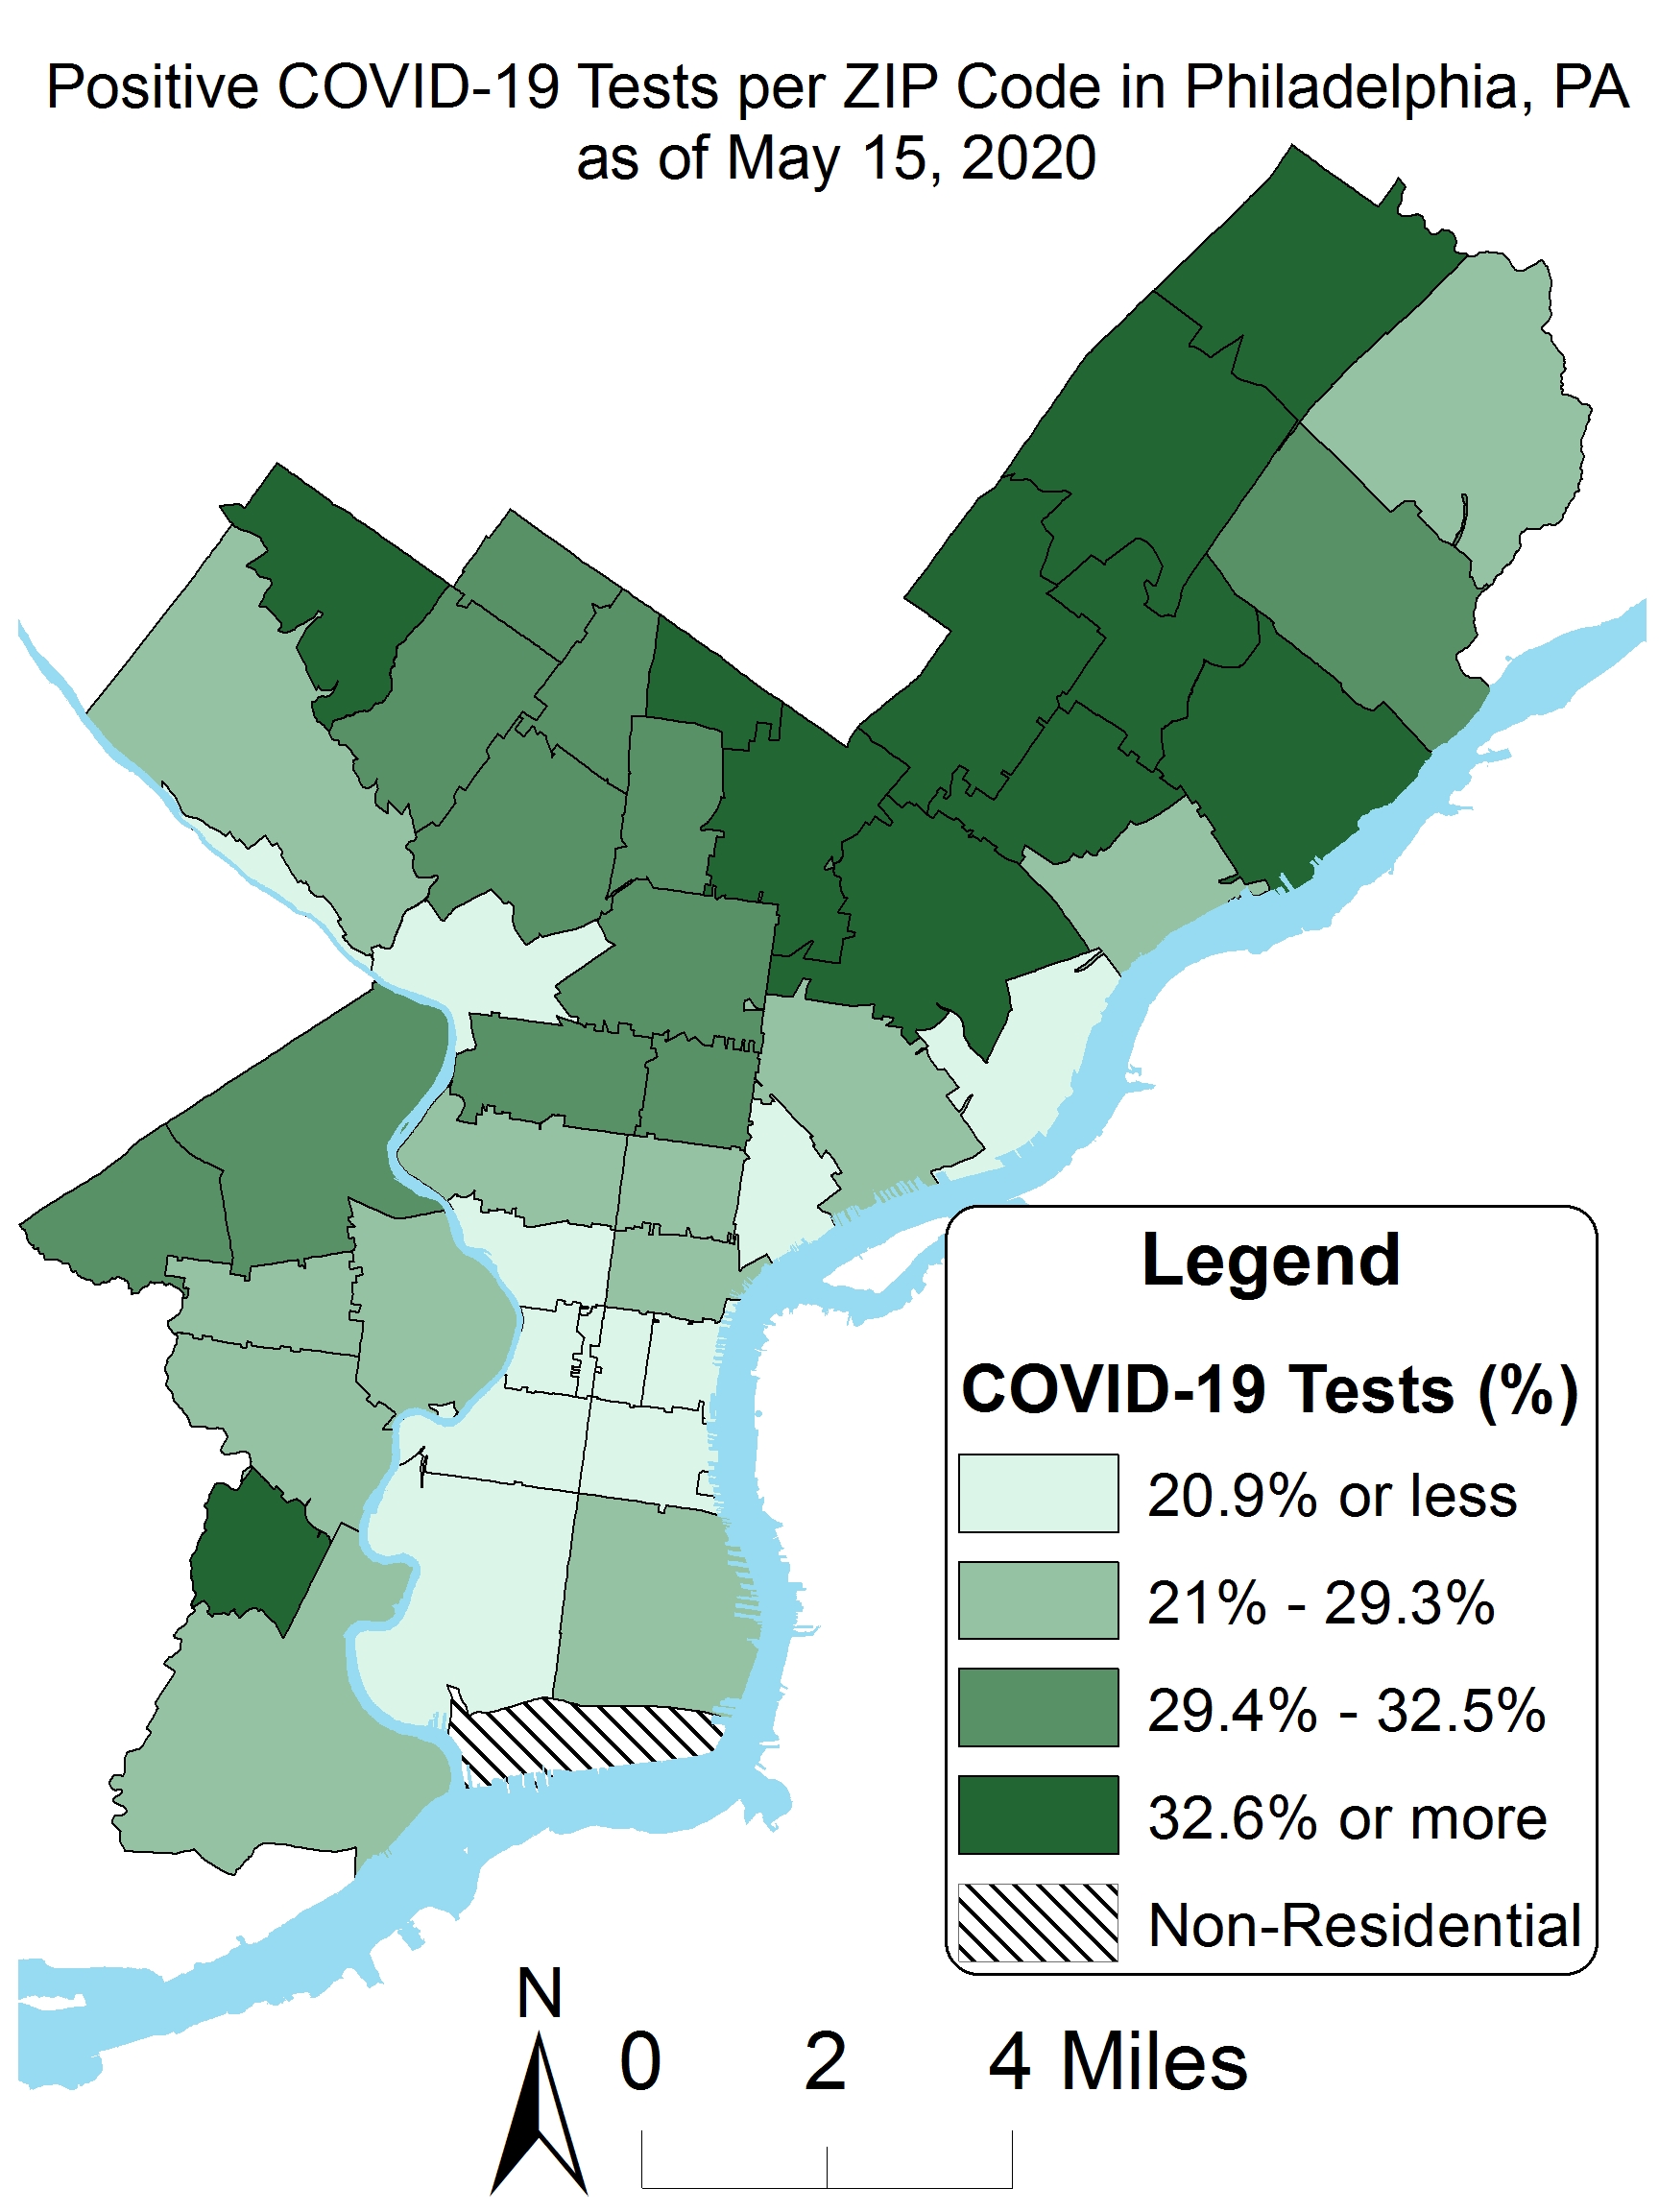 Positive COVID19 test per zip code in Philadelphia as of May 15, 2020